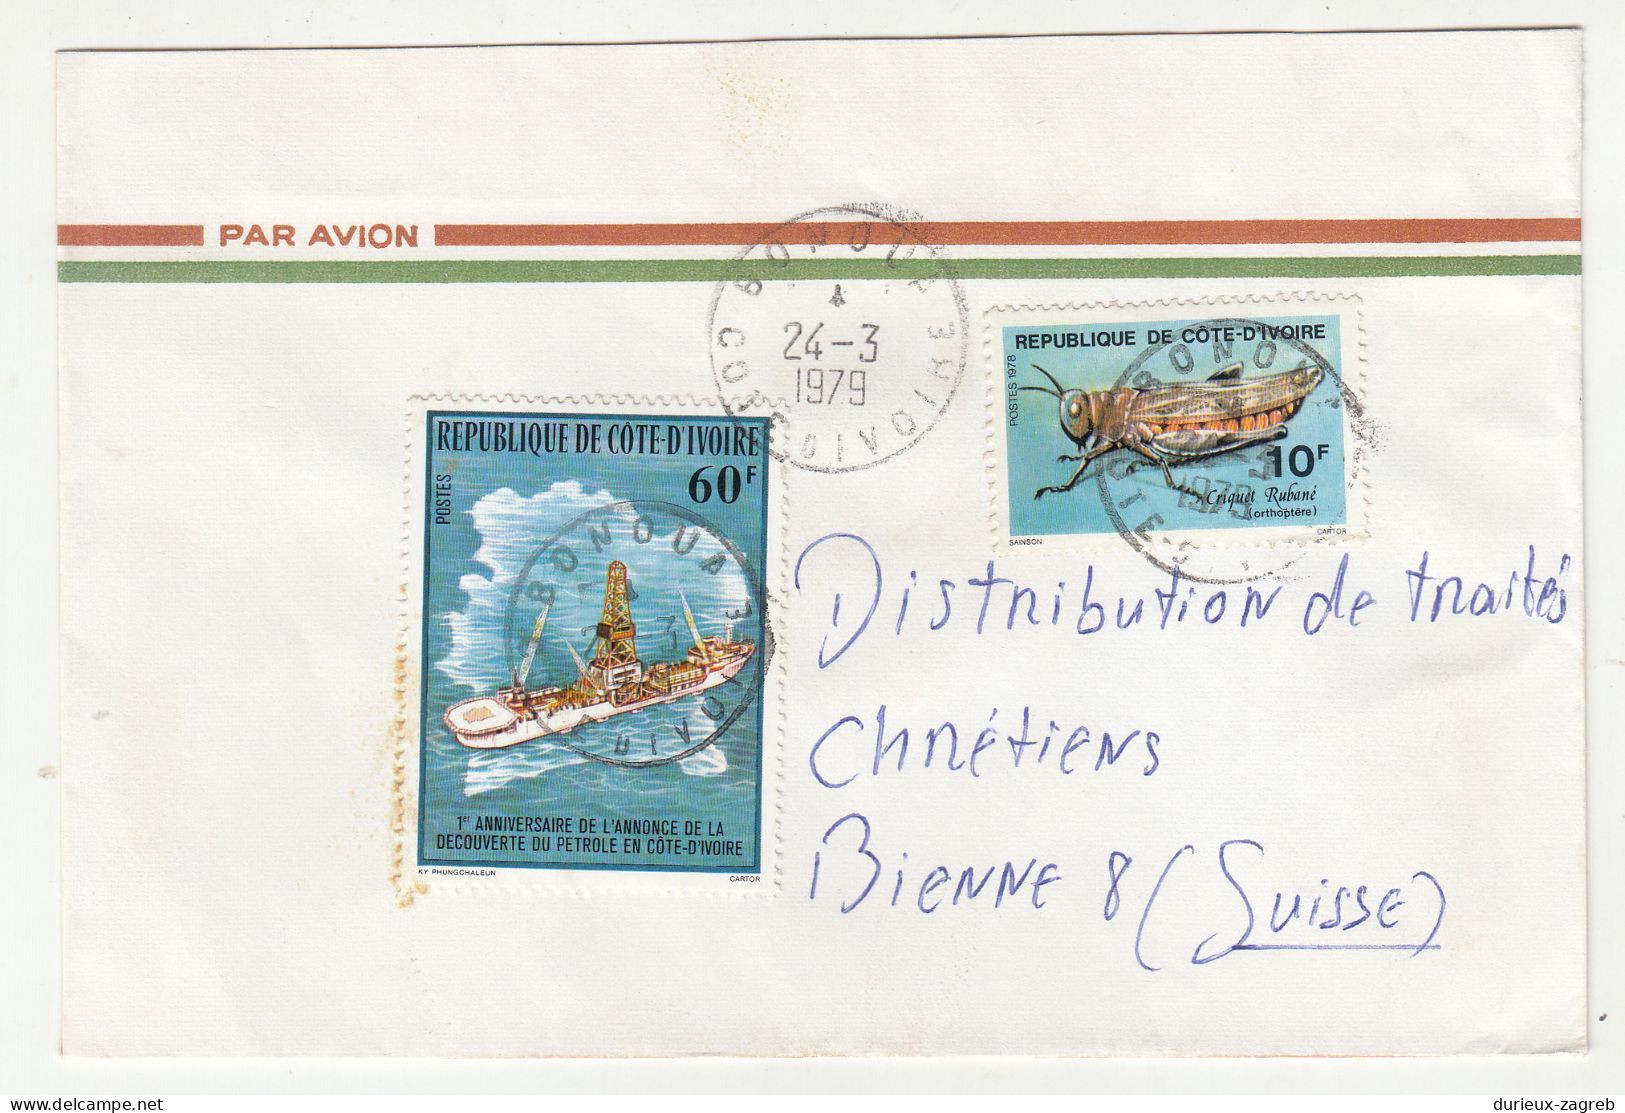 Cote d'Ivoire 12 letter covers posted 1979-1988 to Switzerland b240510